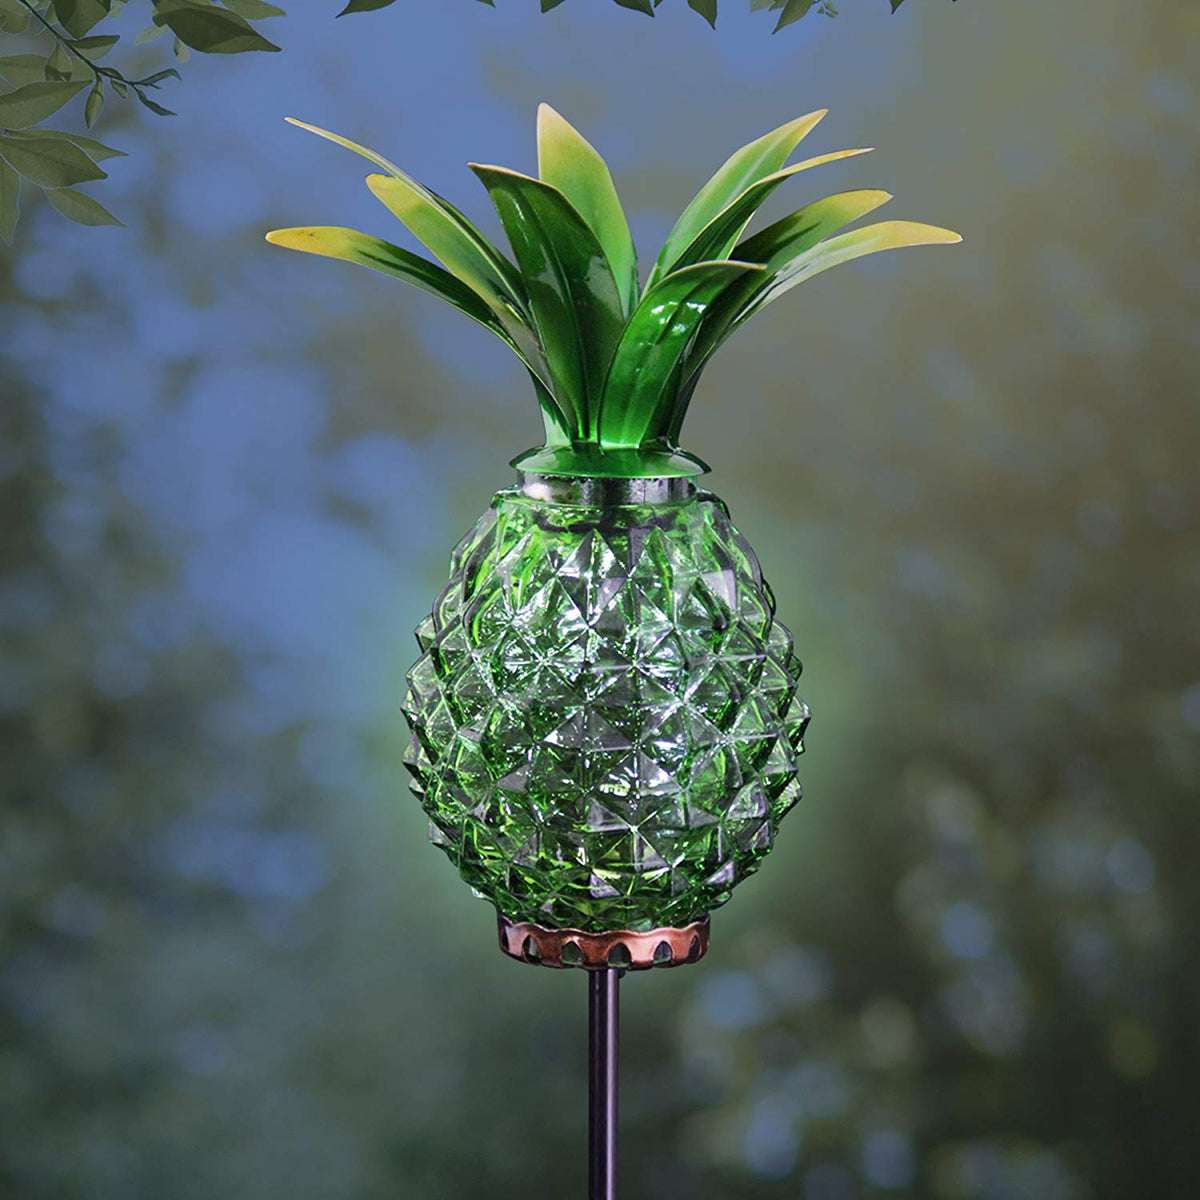 Four Seasons 05710 Solar Metal & Glass Pineapple Garden Stake, Assorted Colors